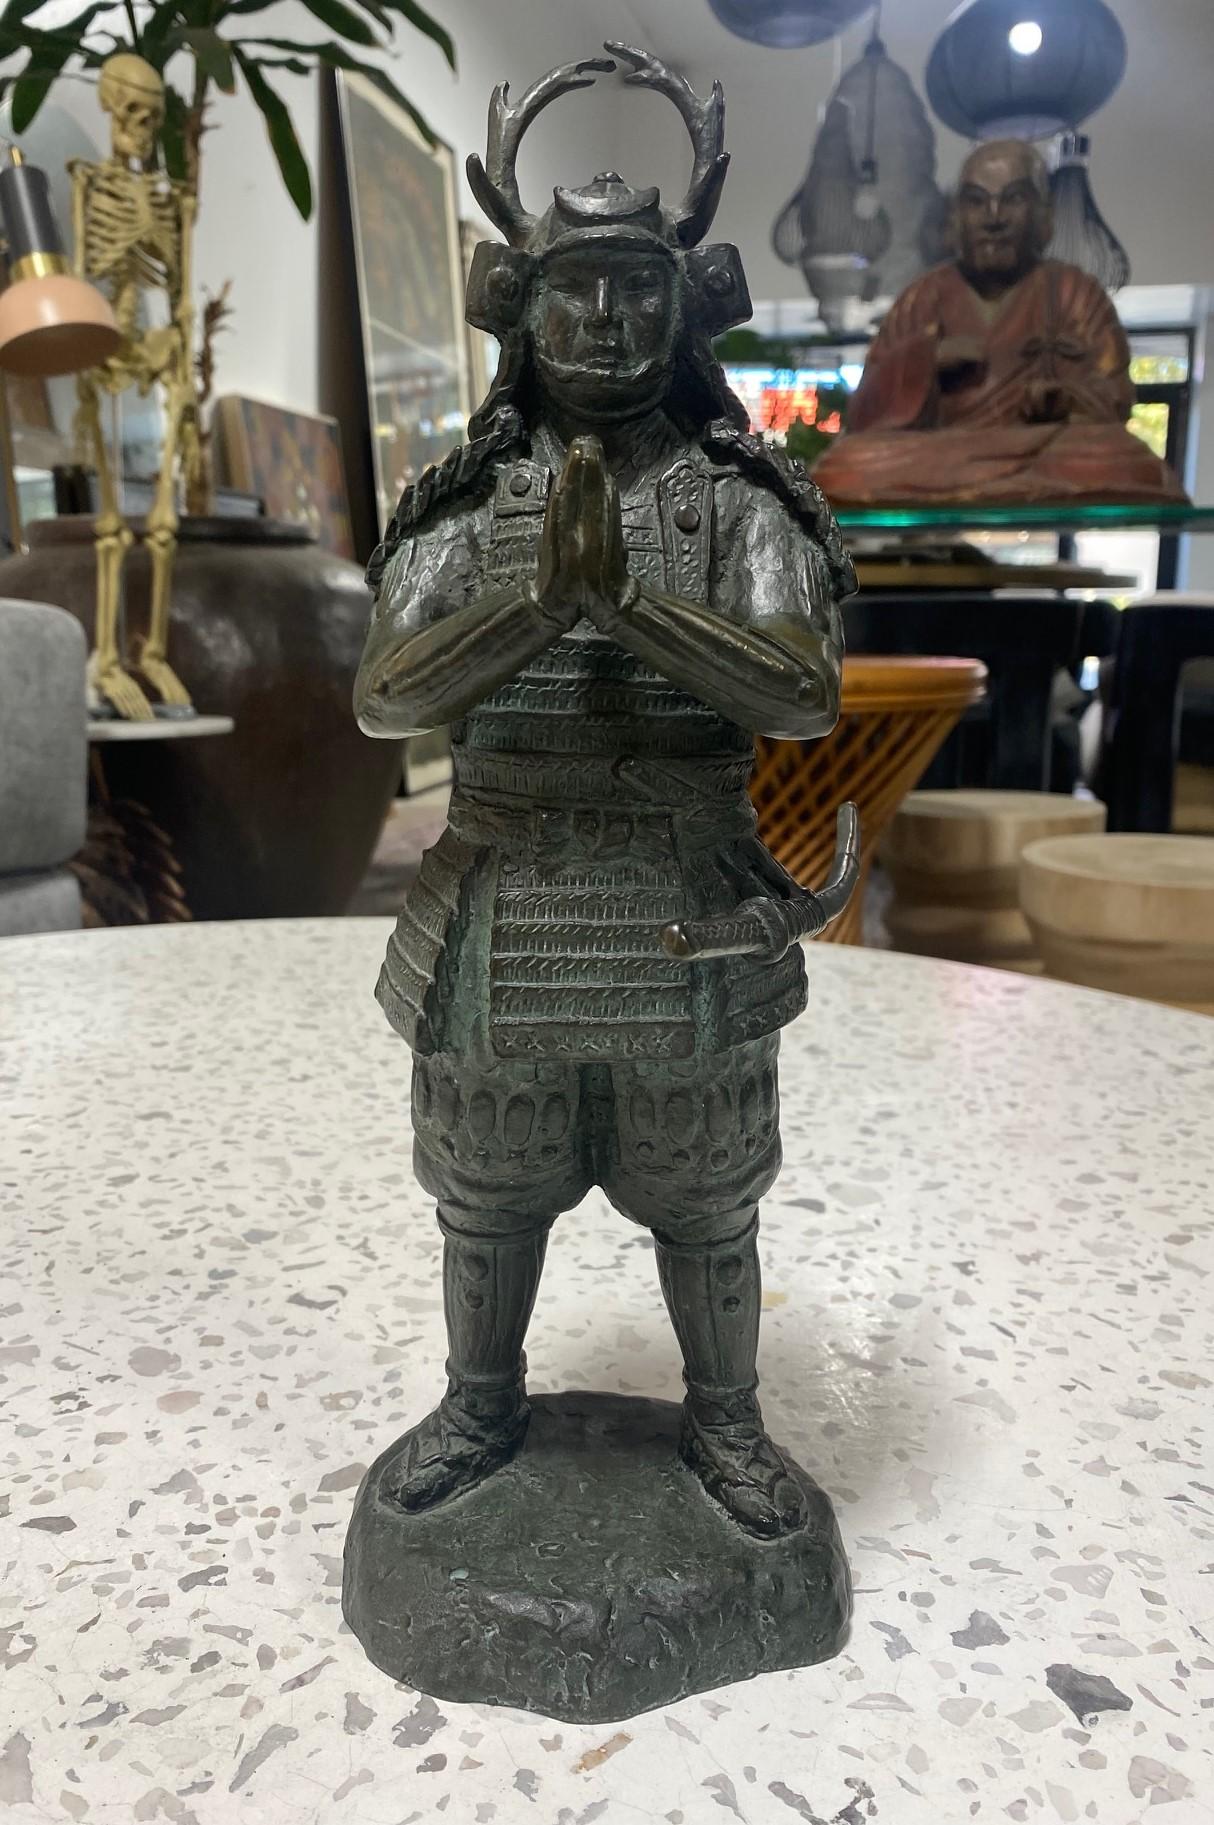 A truly wonderful and boldly designed Japanese bronze sculpture of a fierce samurai warrior perhaps in a moment of silent reflection.  This piece has a great feel and heft.  The fine detail in the samurai's face and armor help make this a special